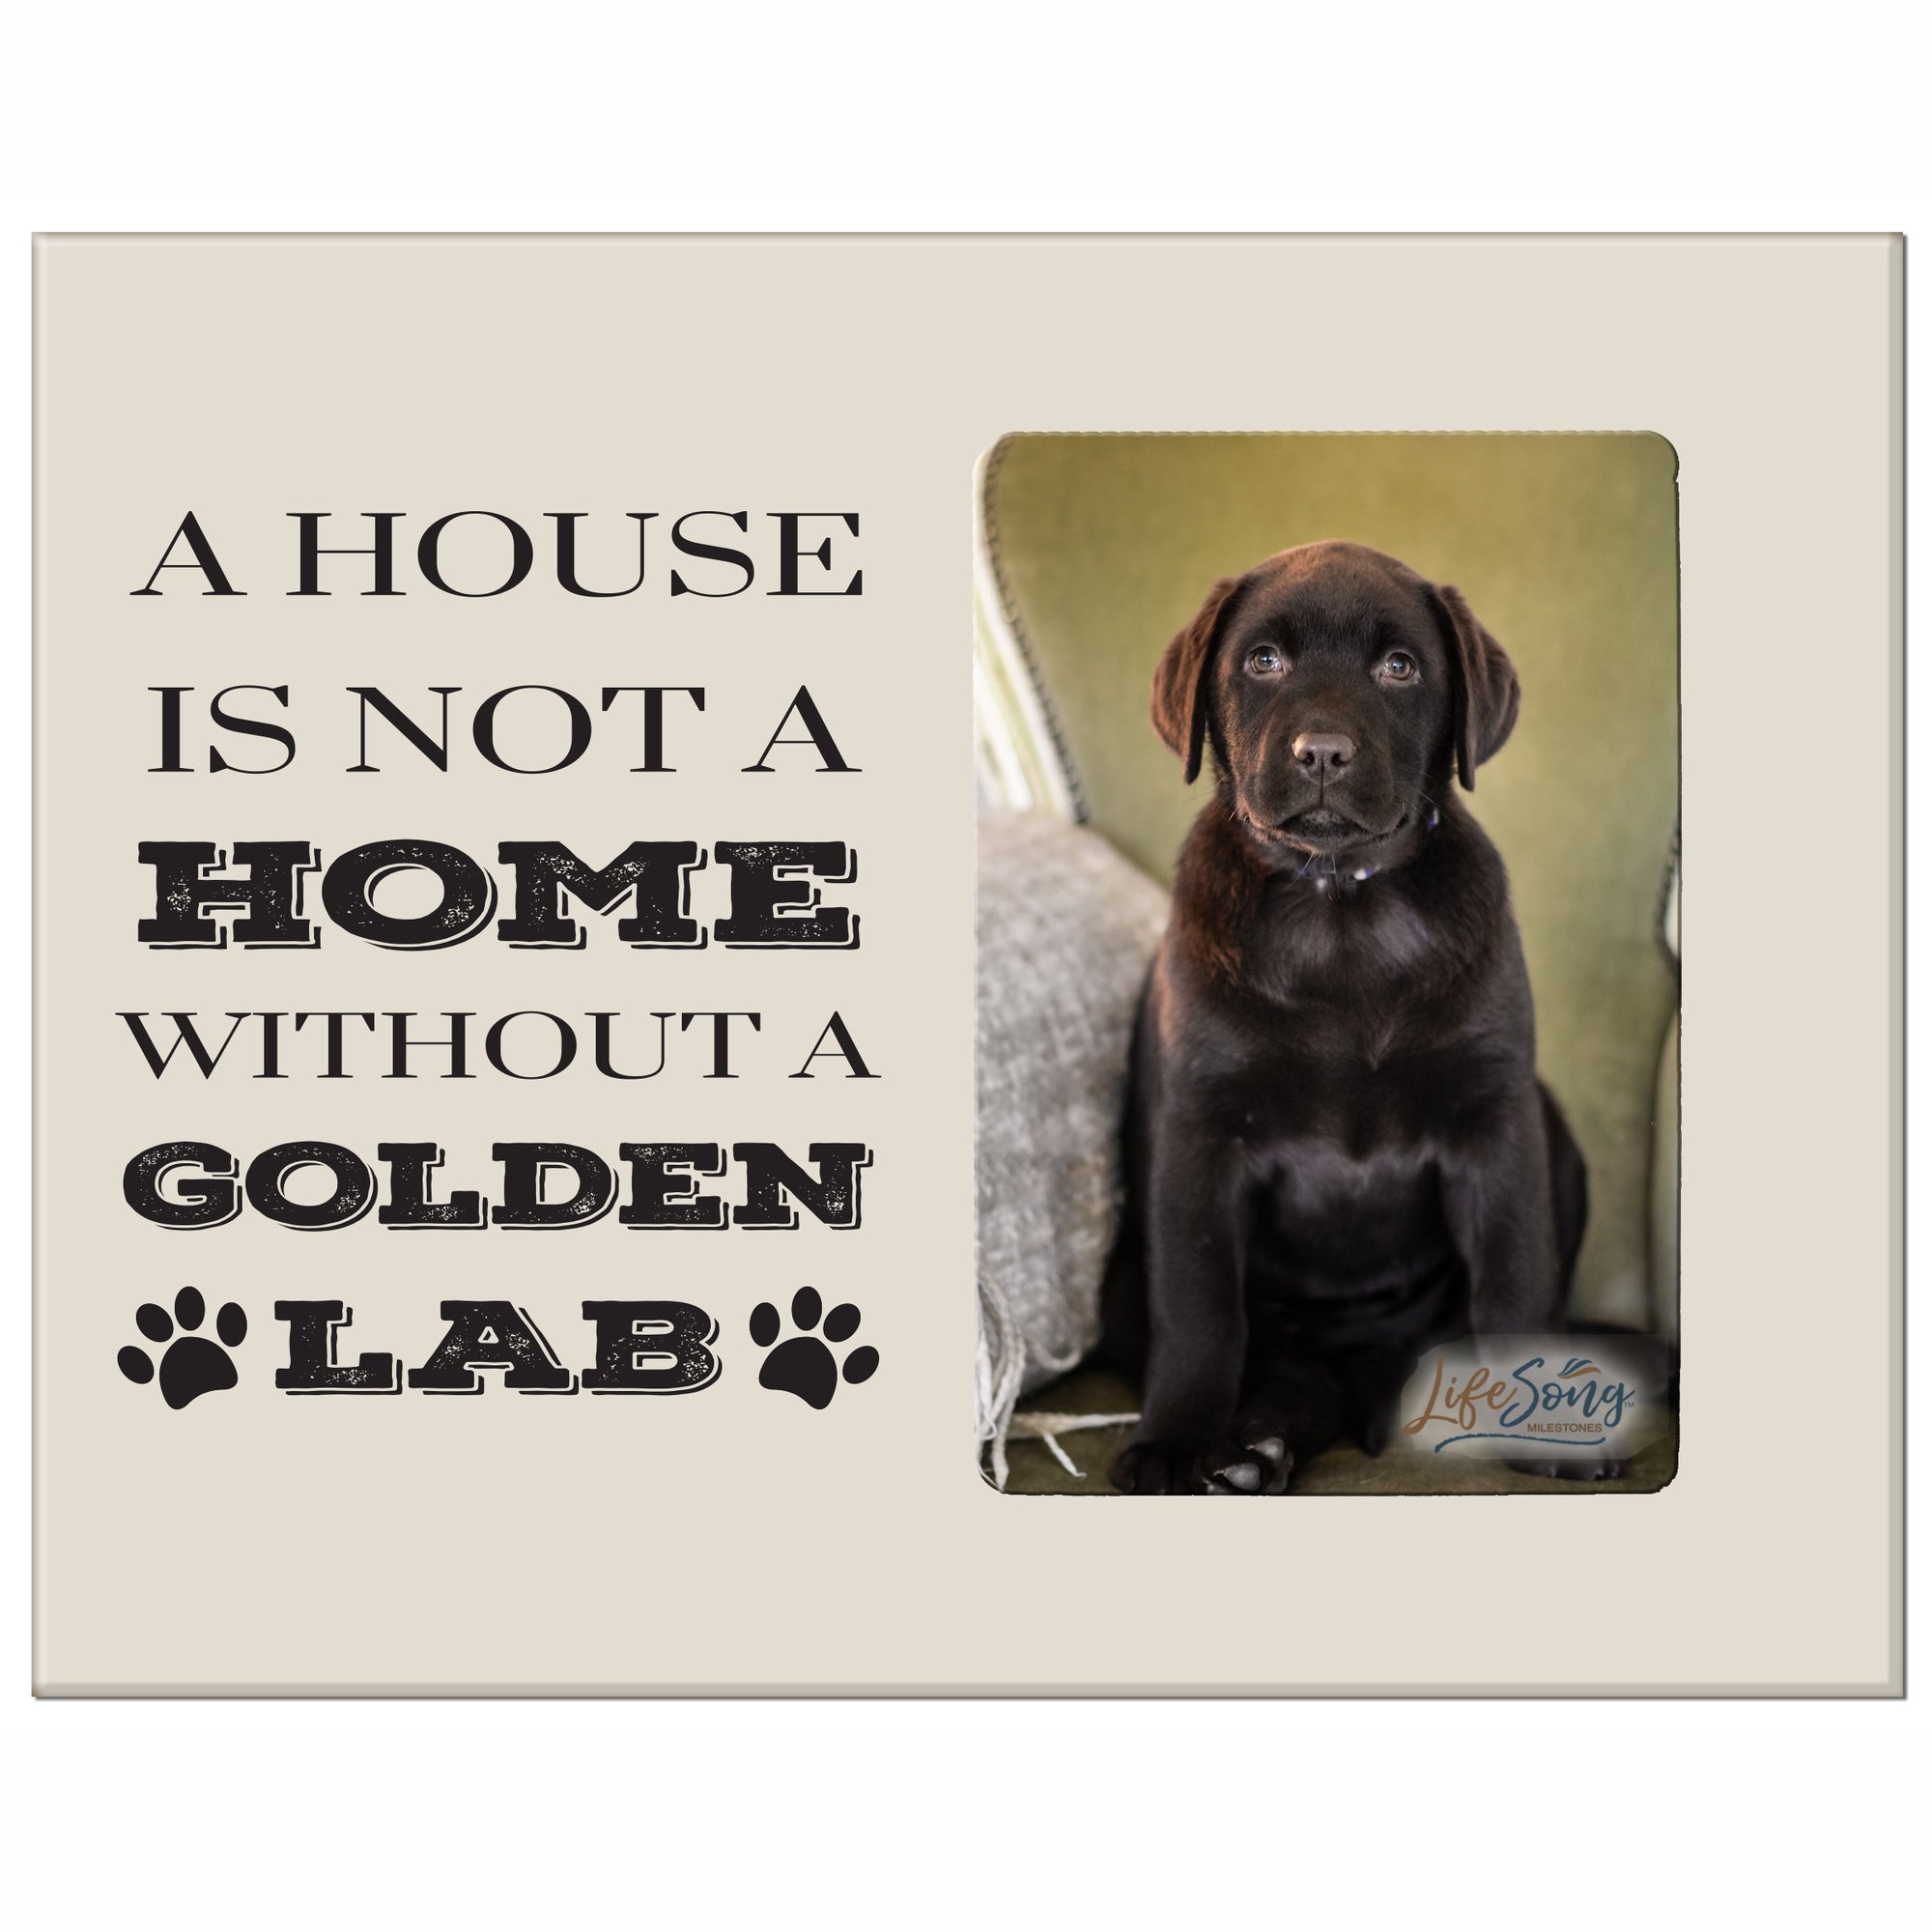 LifeSong Milestones Digitally Printed Pet Vertical Photo Frame Gift Ideas for Black Lab & Dog Lovers - Golden Lab Owner Frame Gift 8”x10” Holds 4”x6” Photo